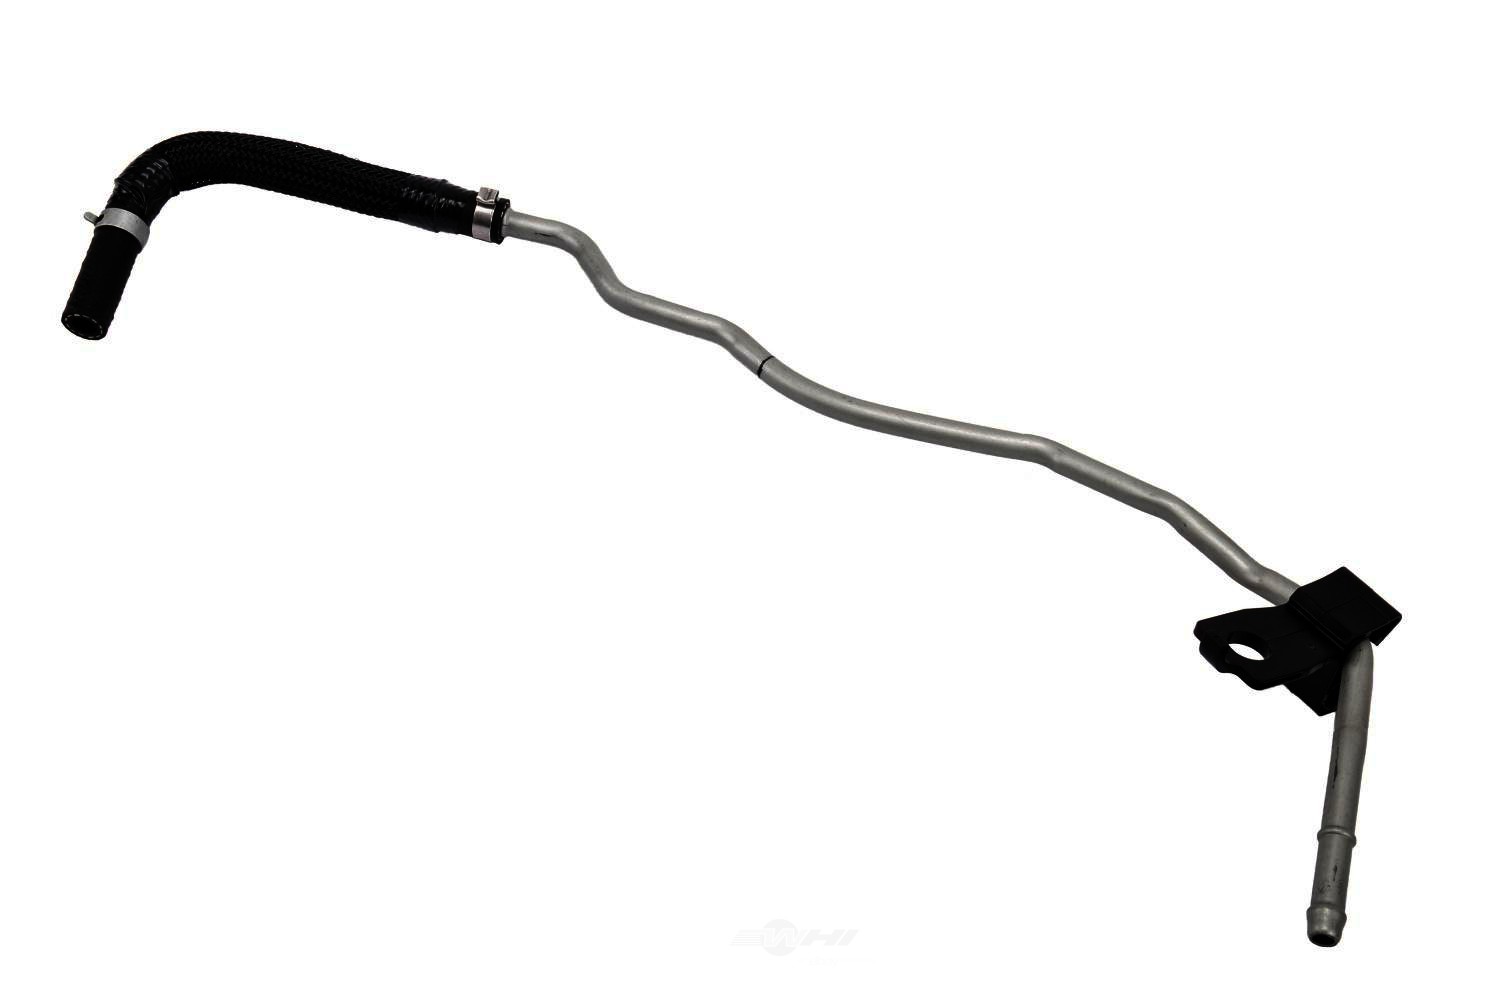 GM GENUINE PARTS - Power Steering Hose - GMP 26075225